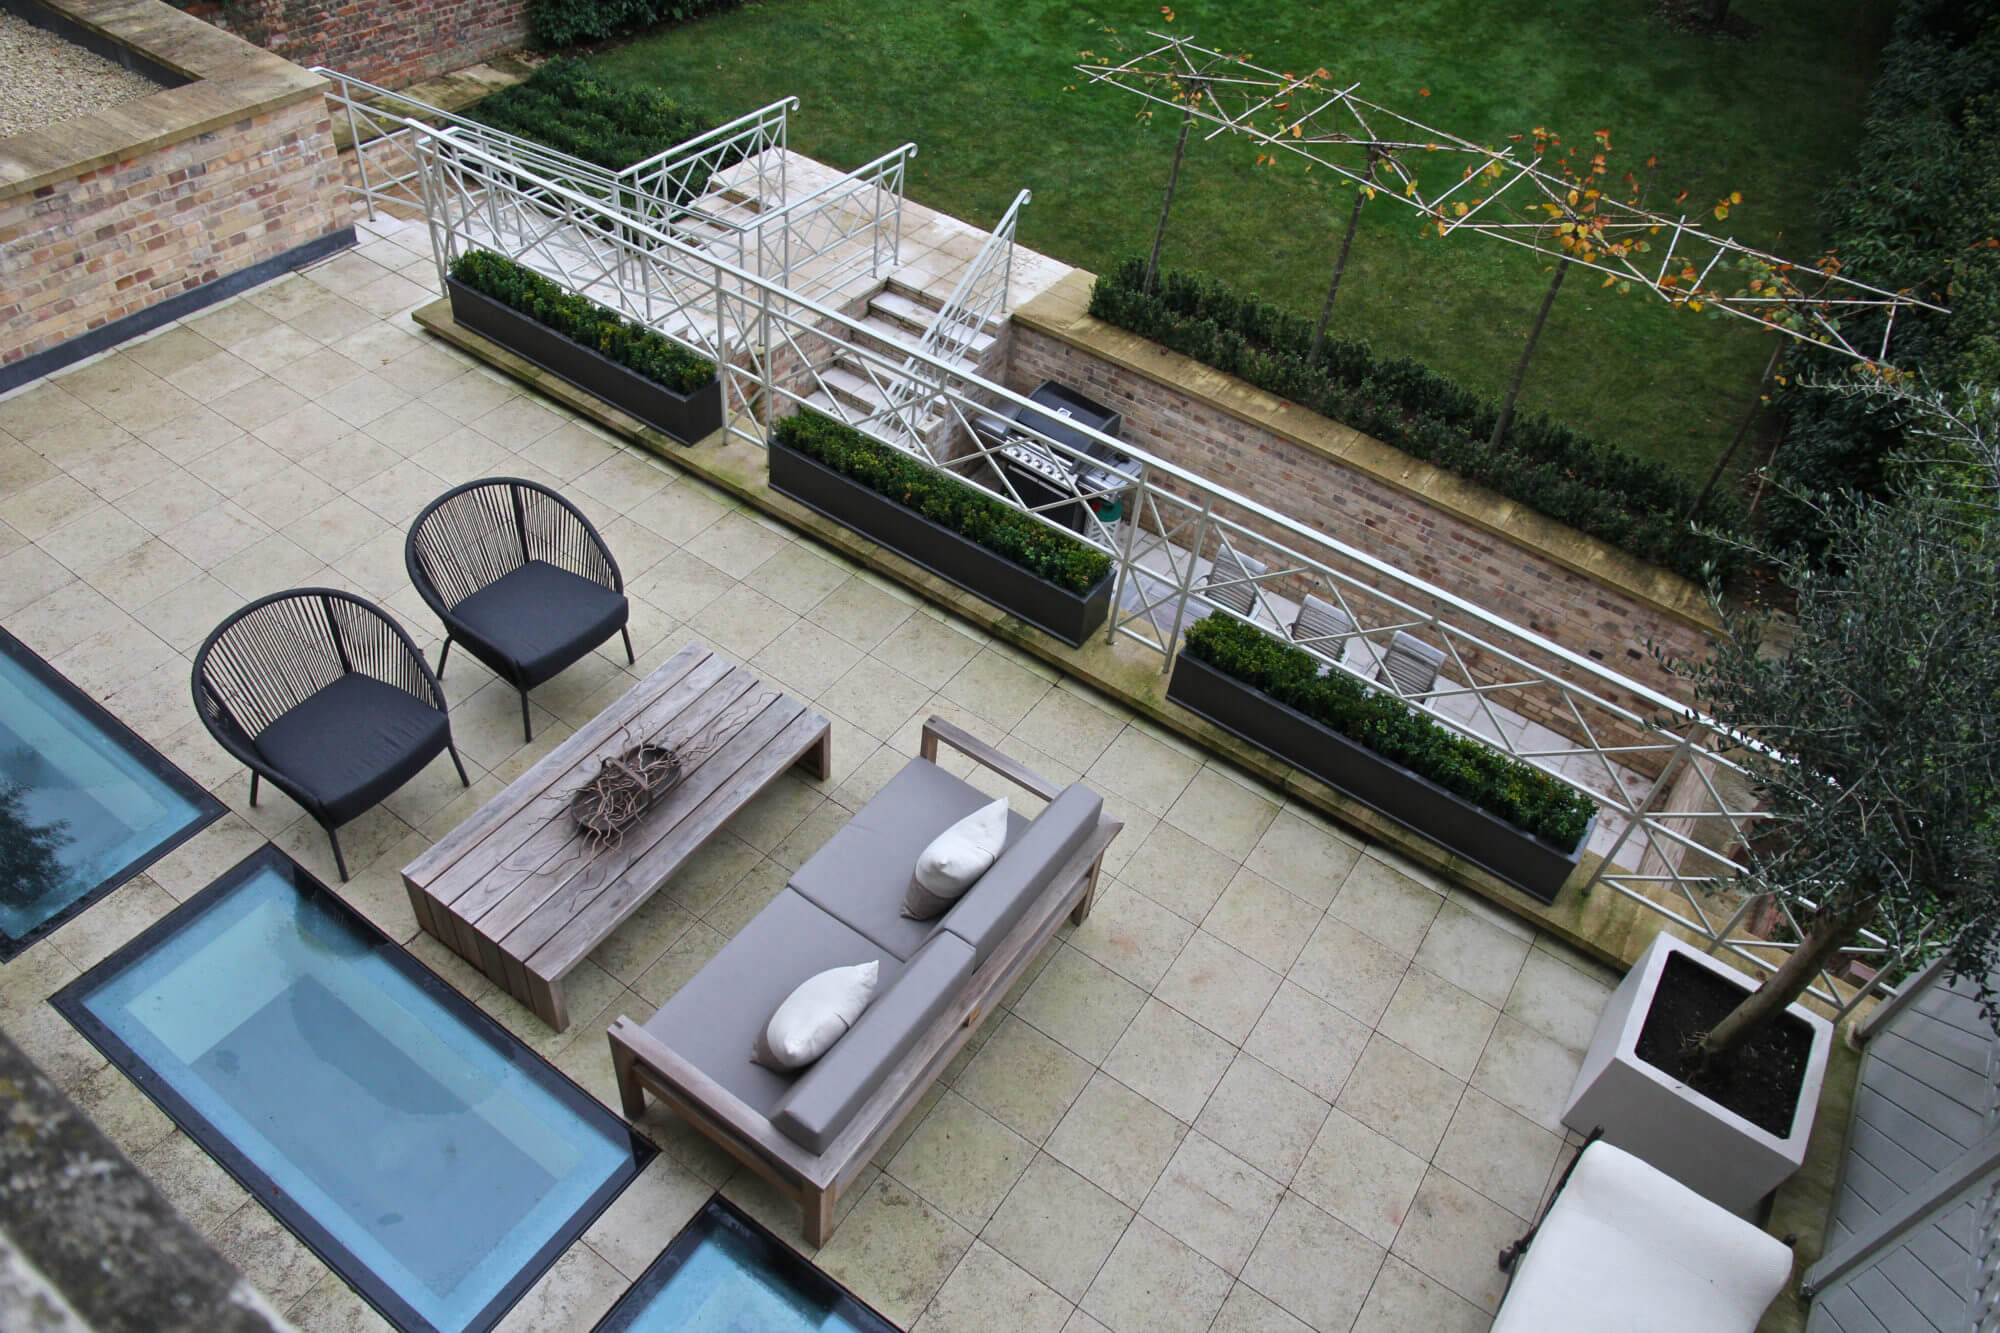 Ariel shot of roof terrace, with outdoor furniture, elements of water and topiary